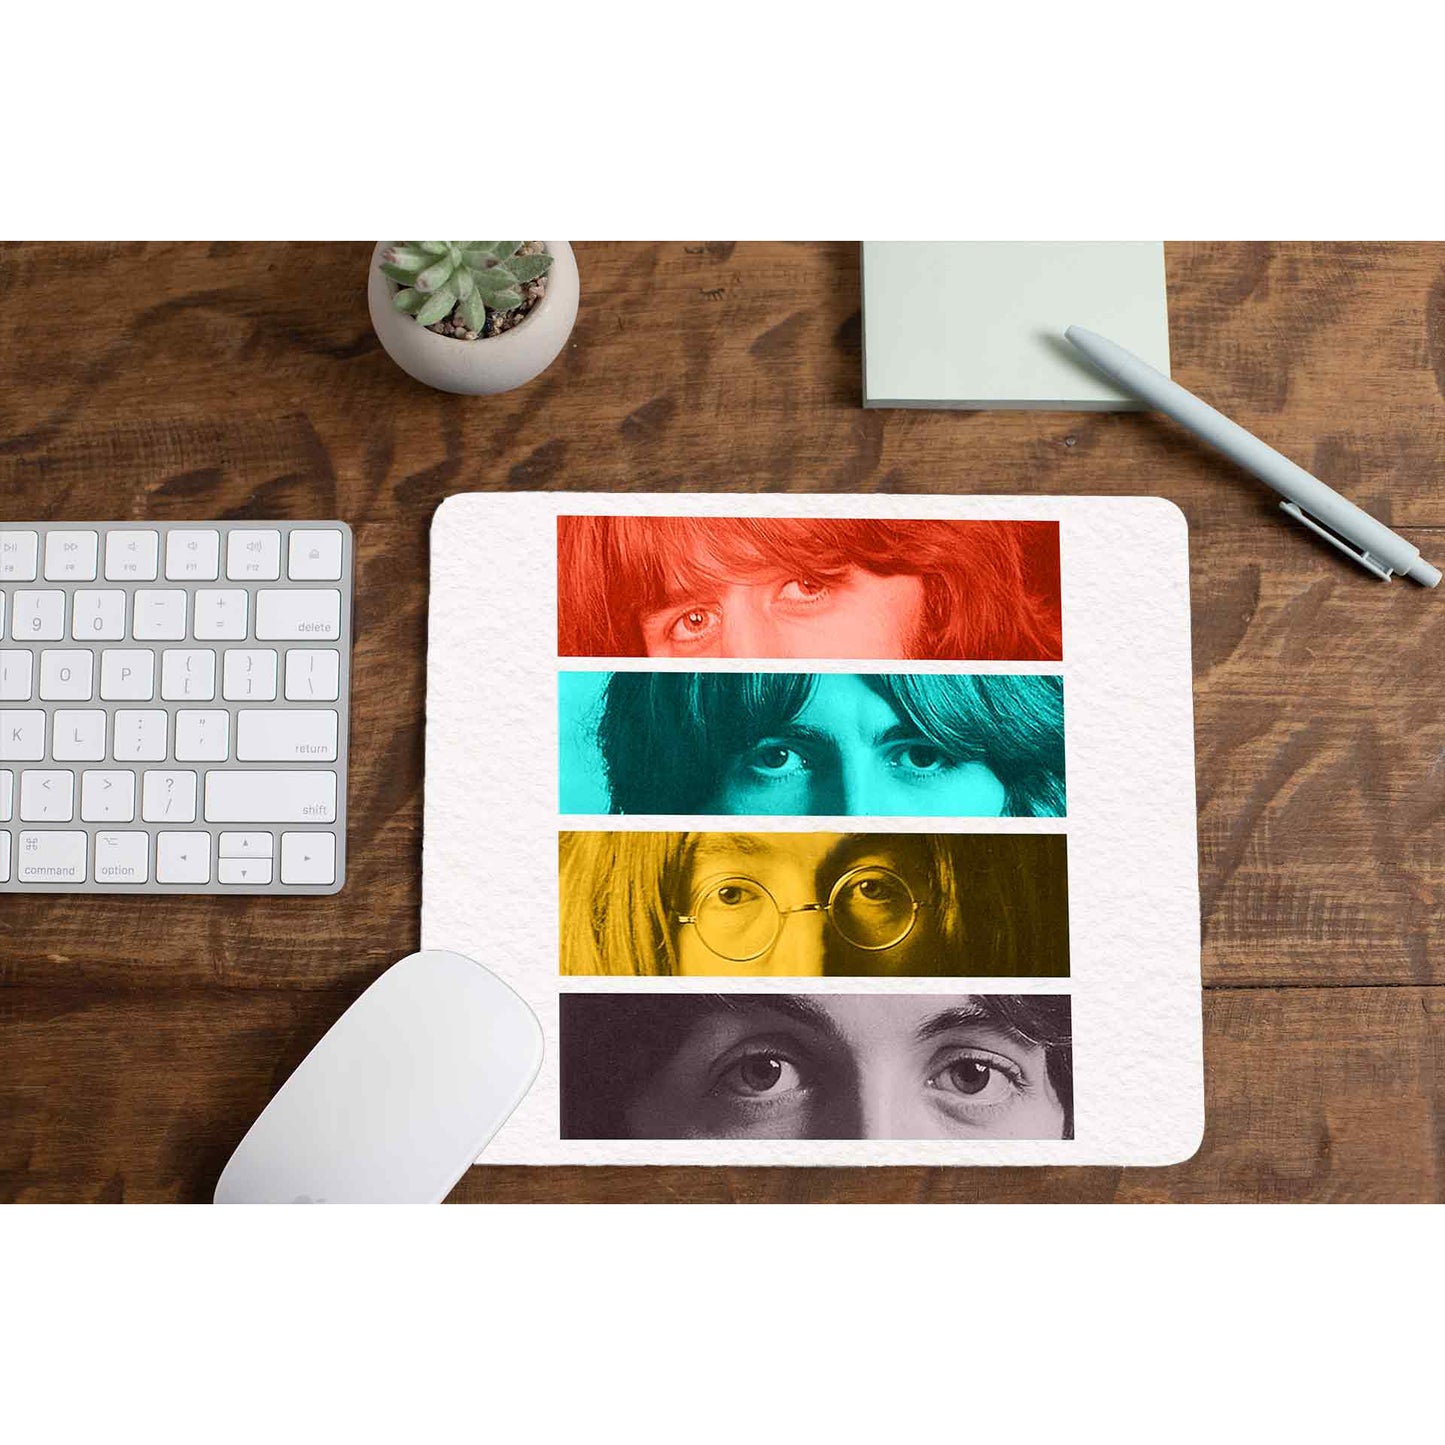 Legends The Beatles Mousepad The Banyan Tee TBT Mouse pad computer accessory